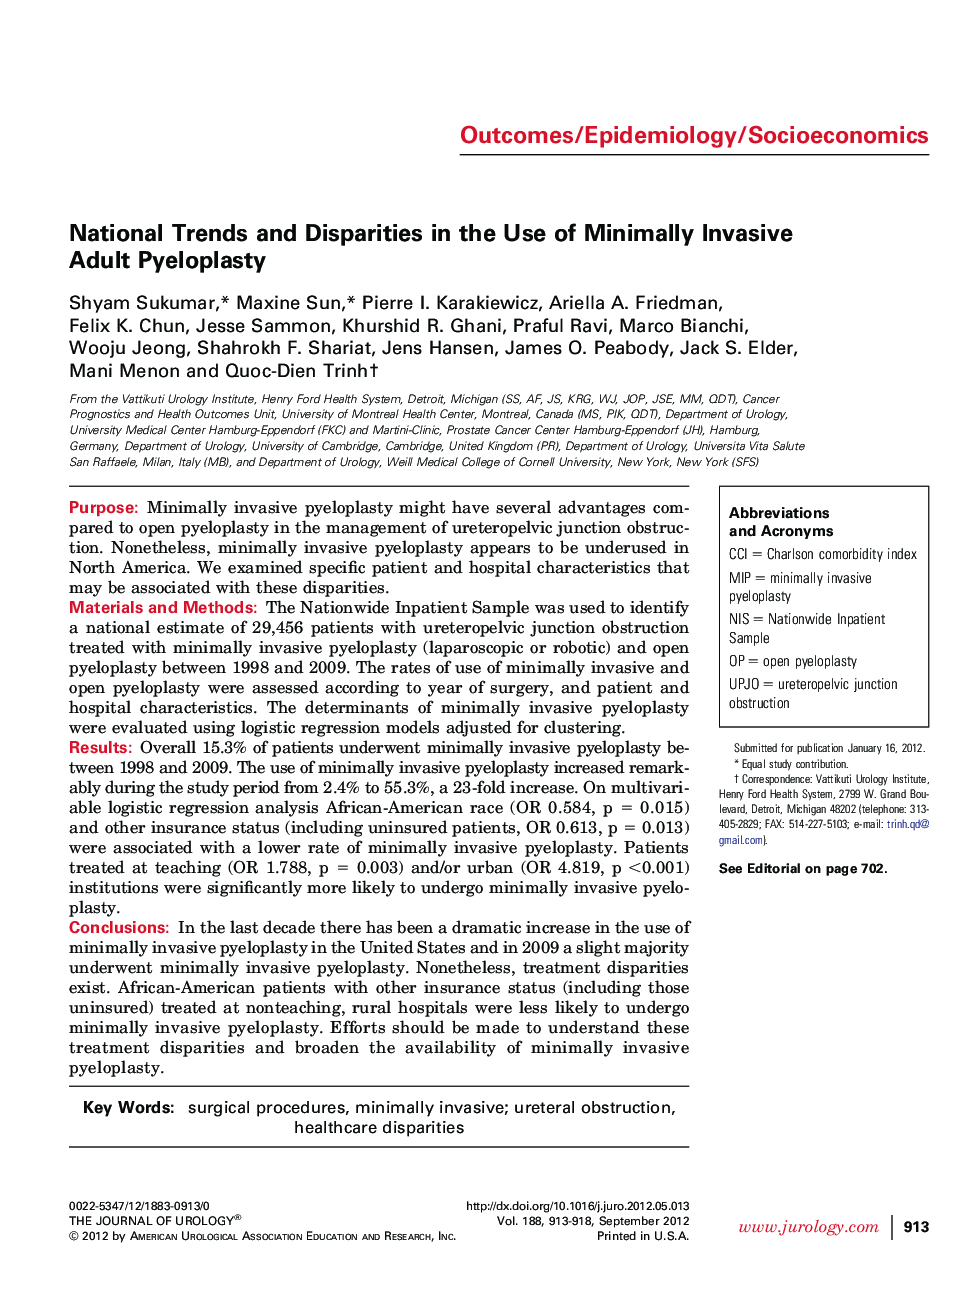 National Trends and Disparities in the Use of Minimally Invasive Adult Pyeloplasty